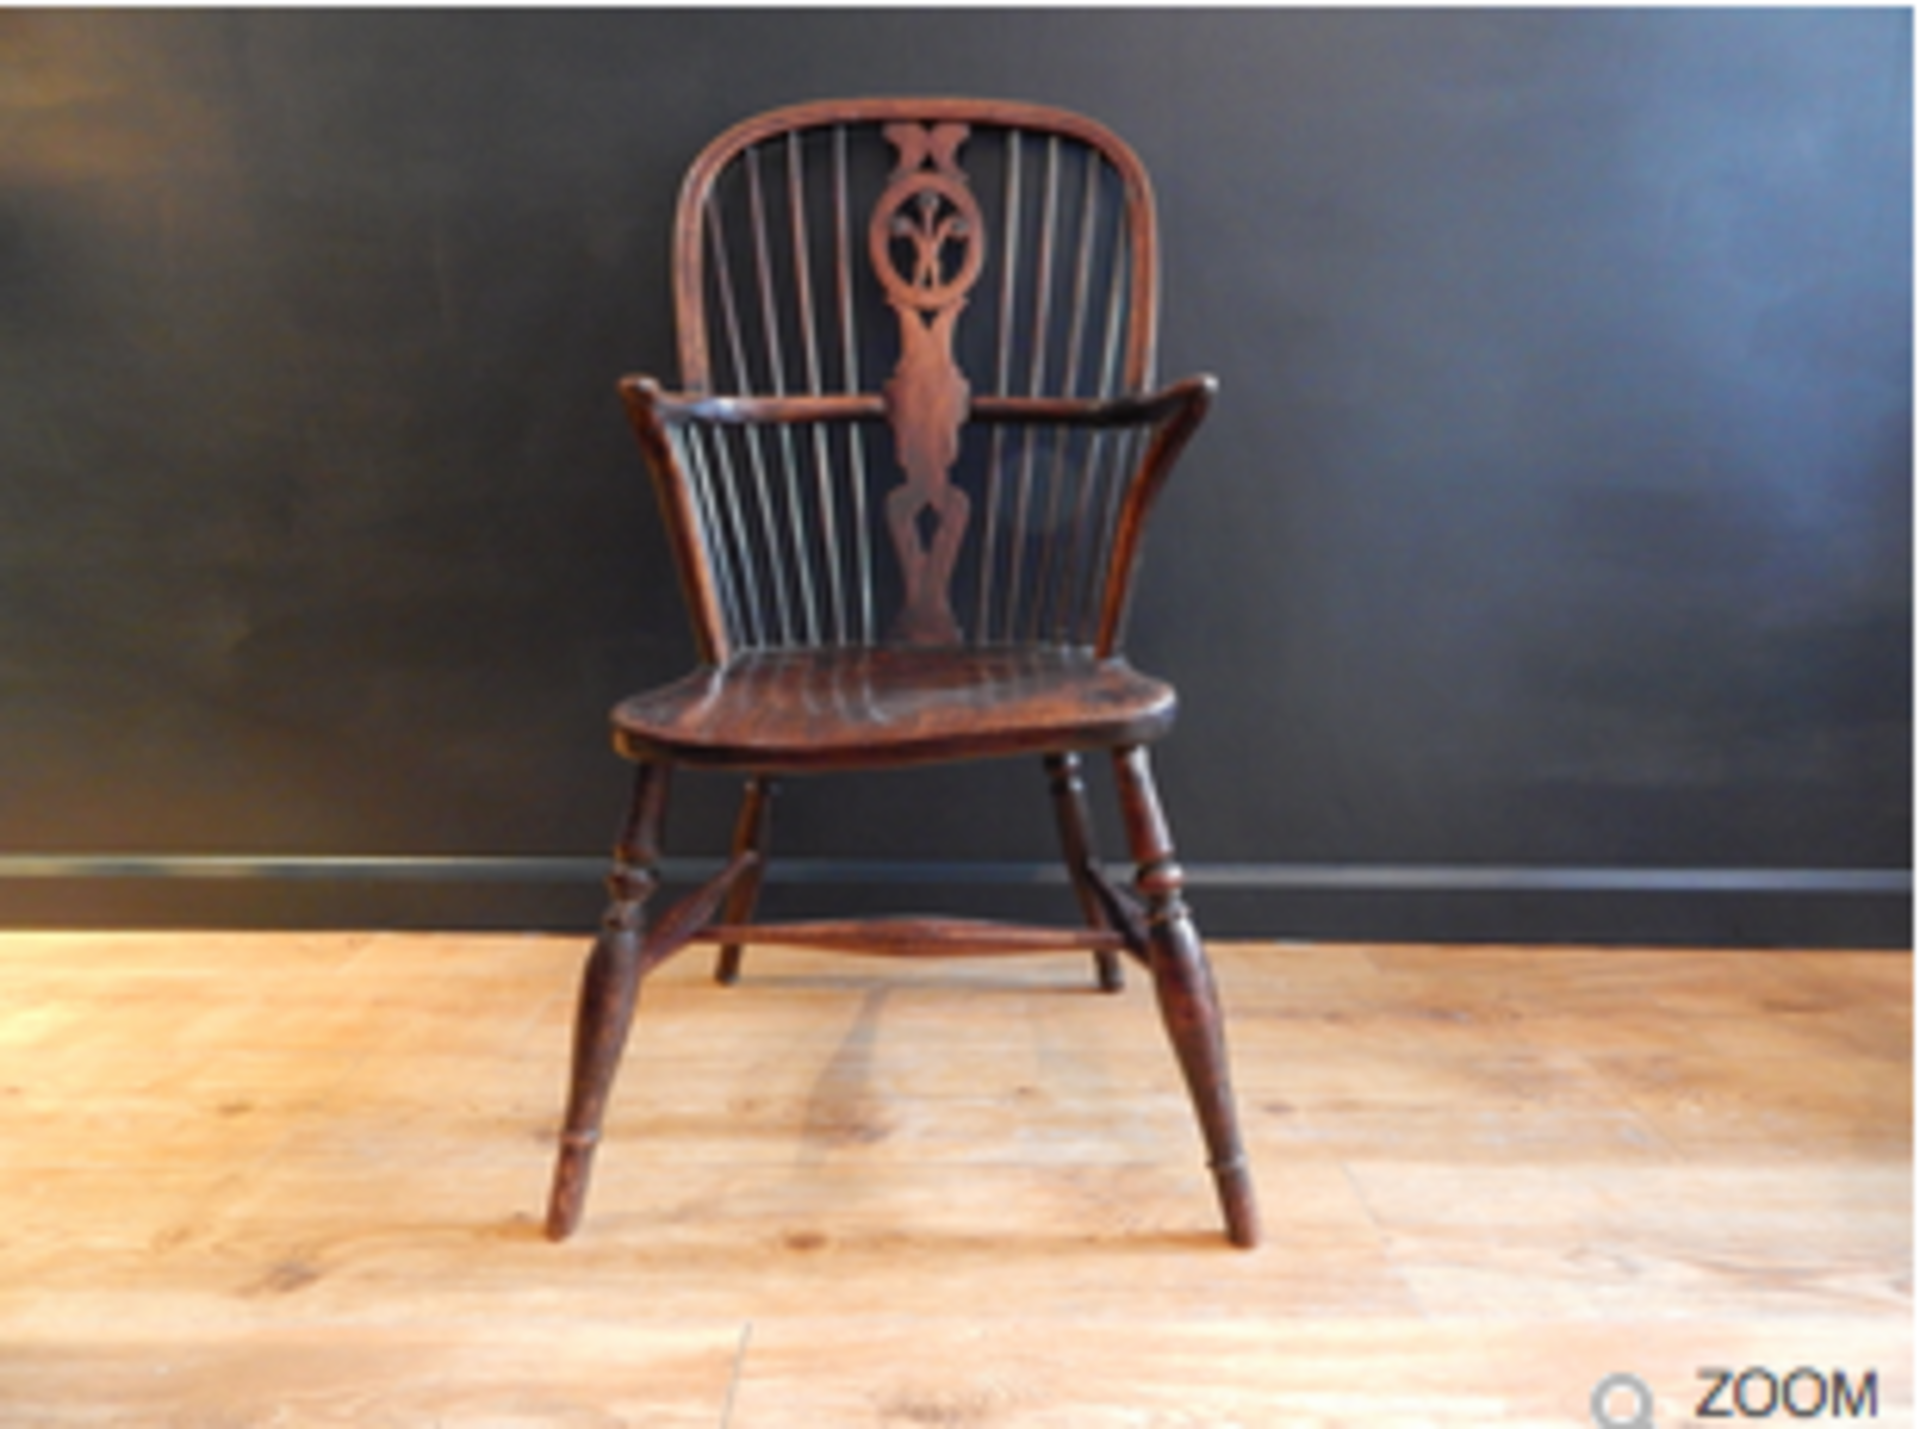 Early 19th Century Windsor Chair – Fruitwood with Prince of Wales Feathers splat - Image 2 of 6